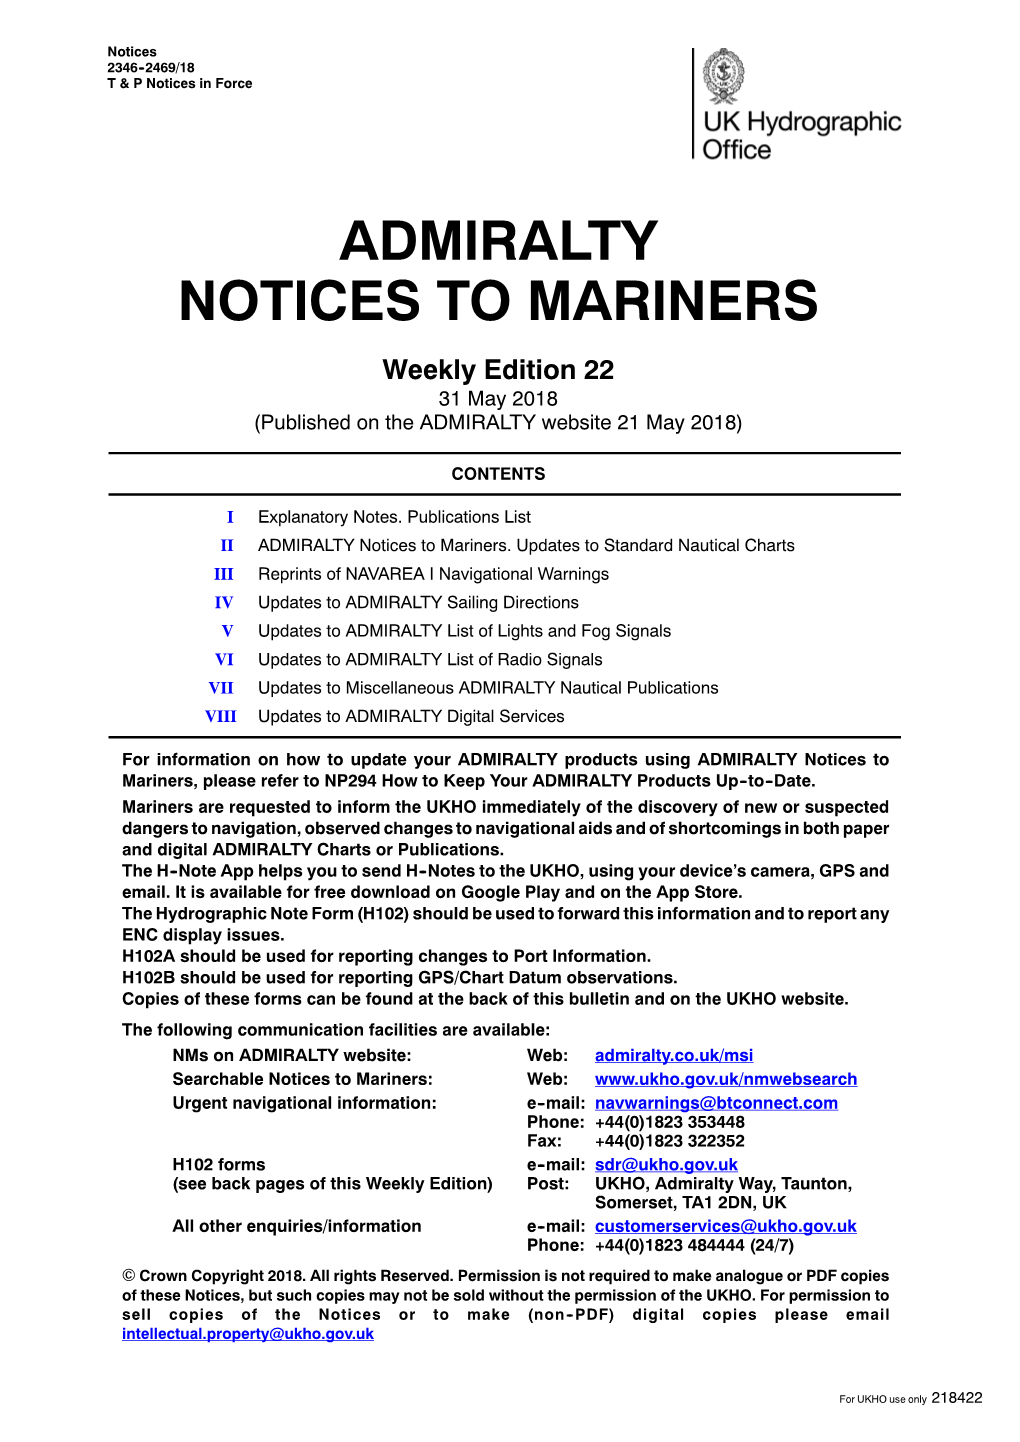 ADMIRALTY NOTICES to MARINERS Weekly Edition 22 31 May 2018 (Published on the ADMIRALTY Website 21 May 2018)